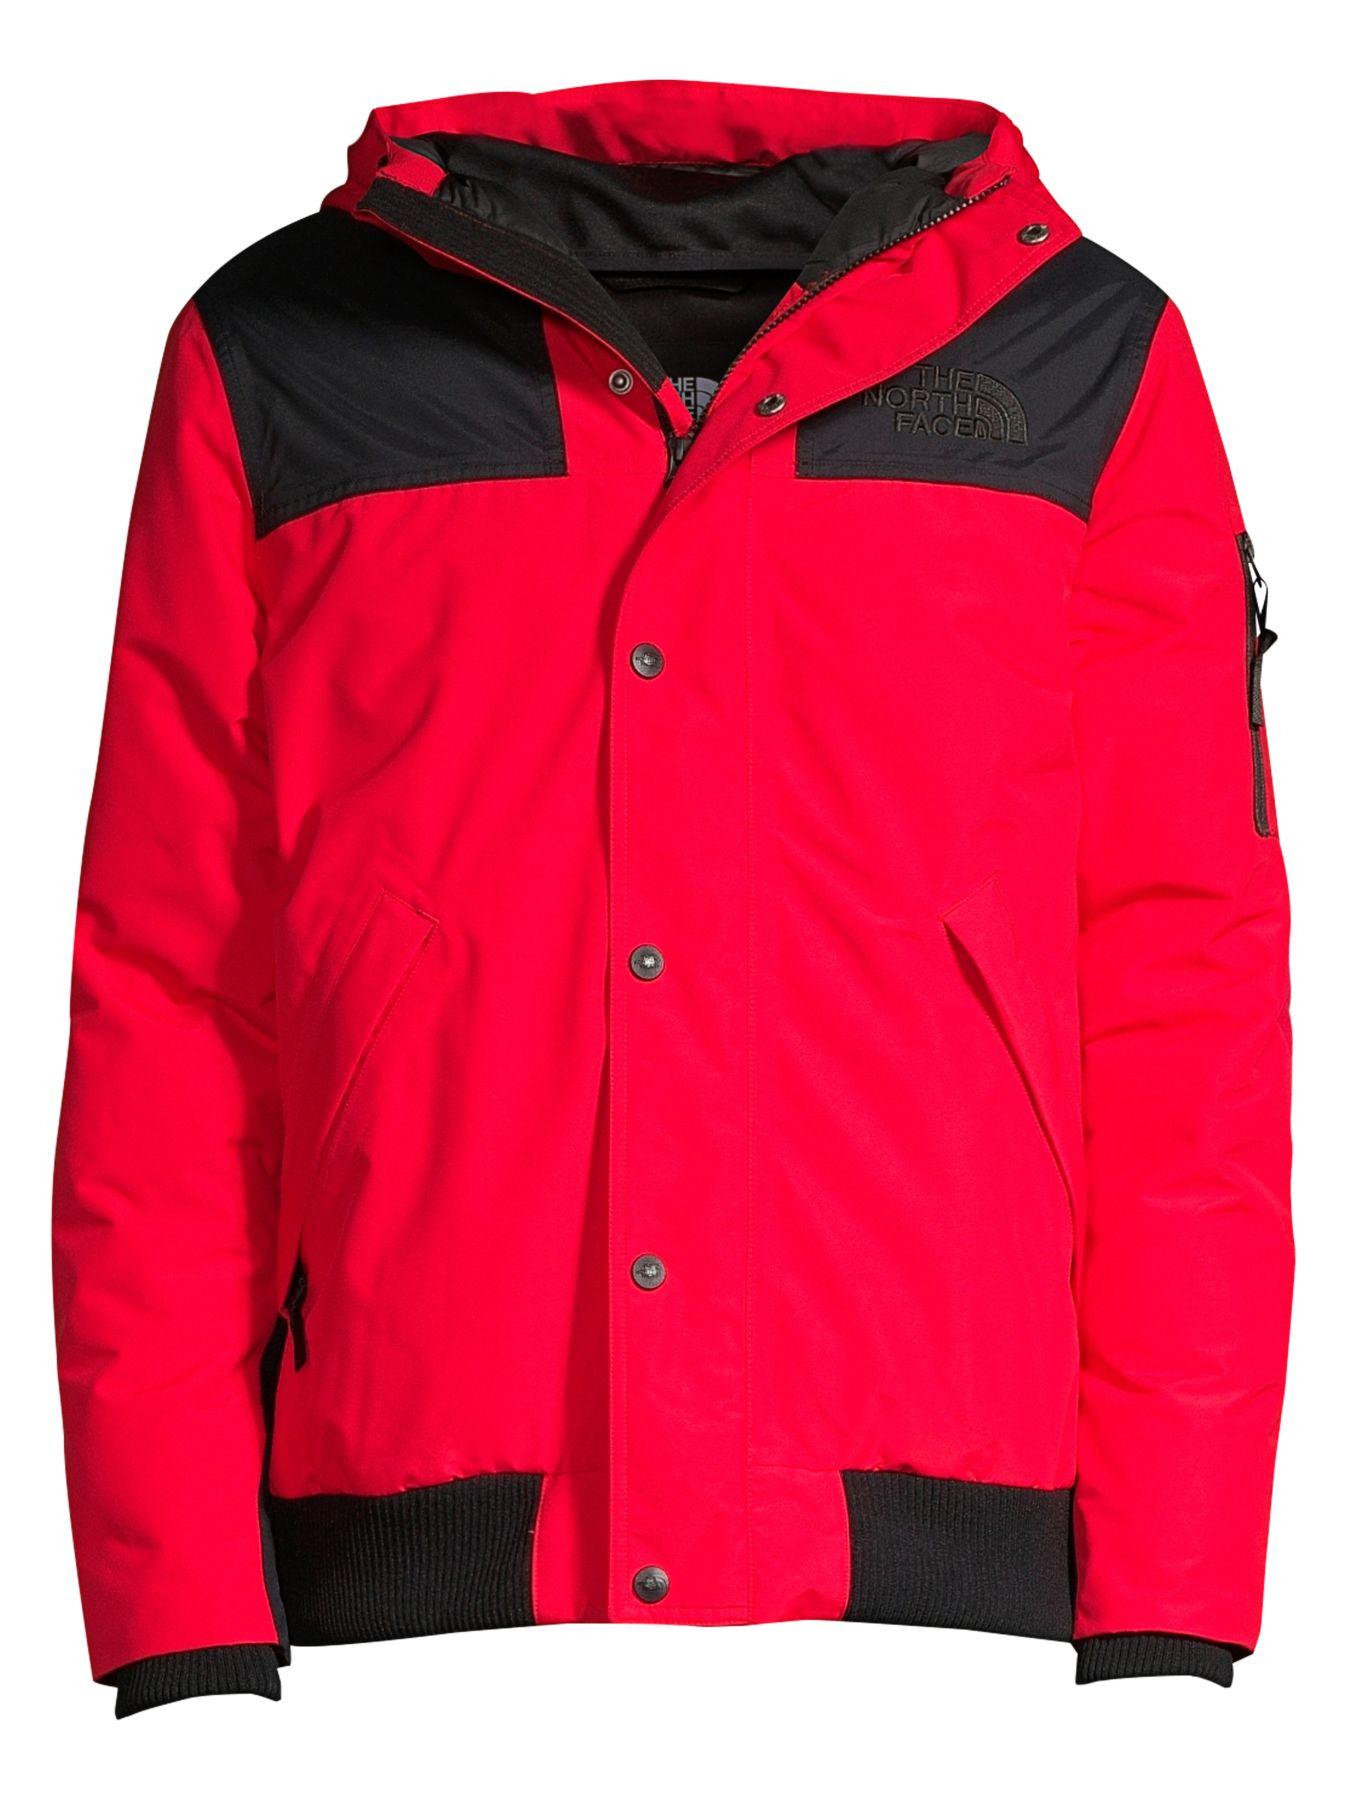 The North Face Synthetic Newington Down Jacket in Red for Men - Lyst